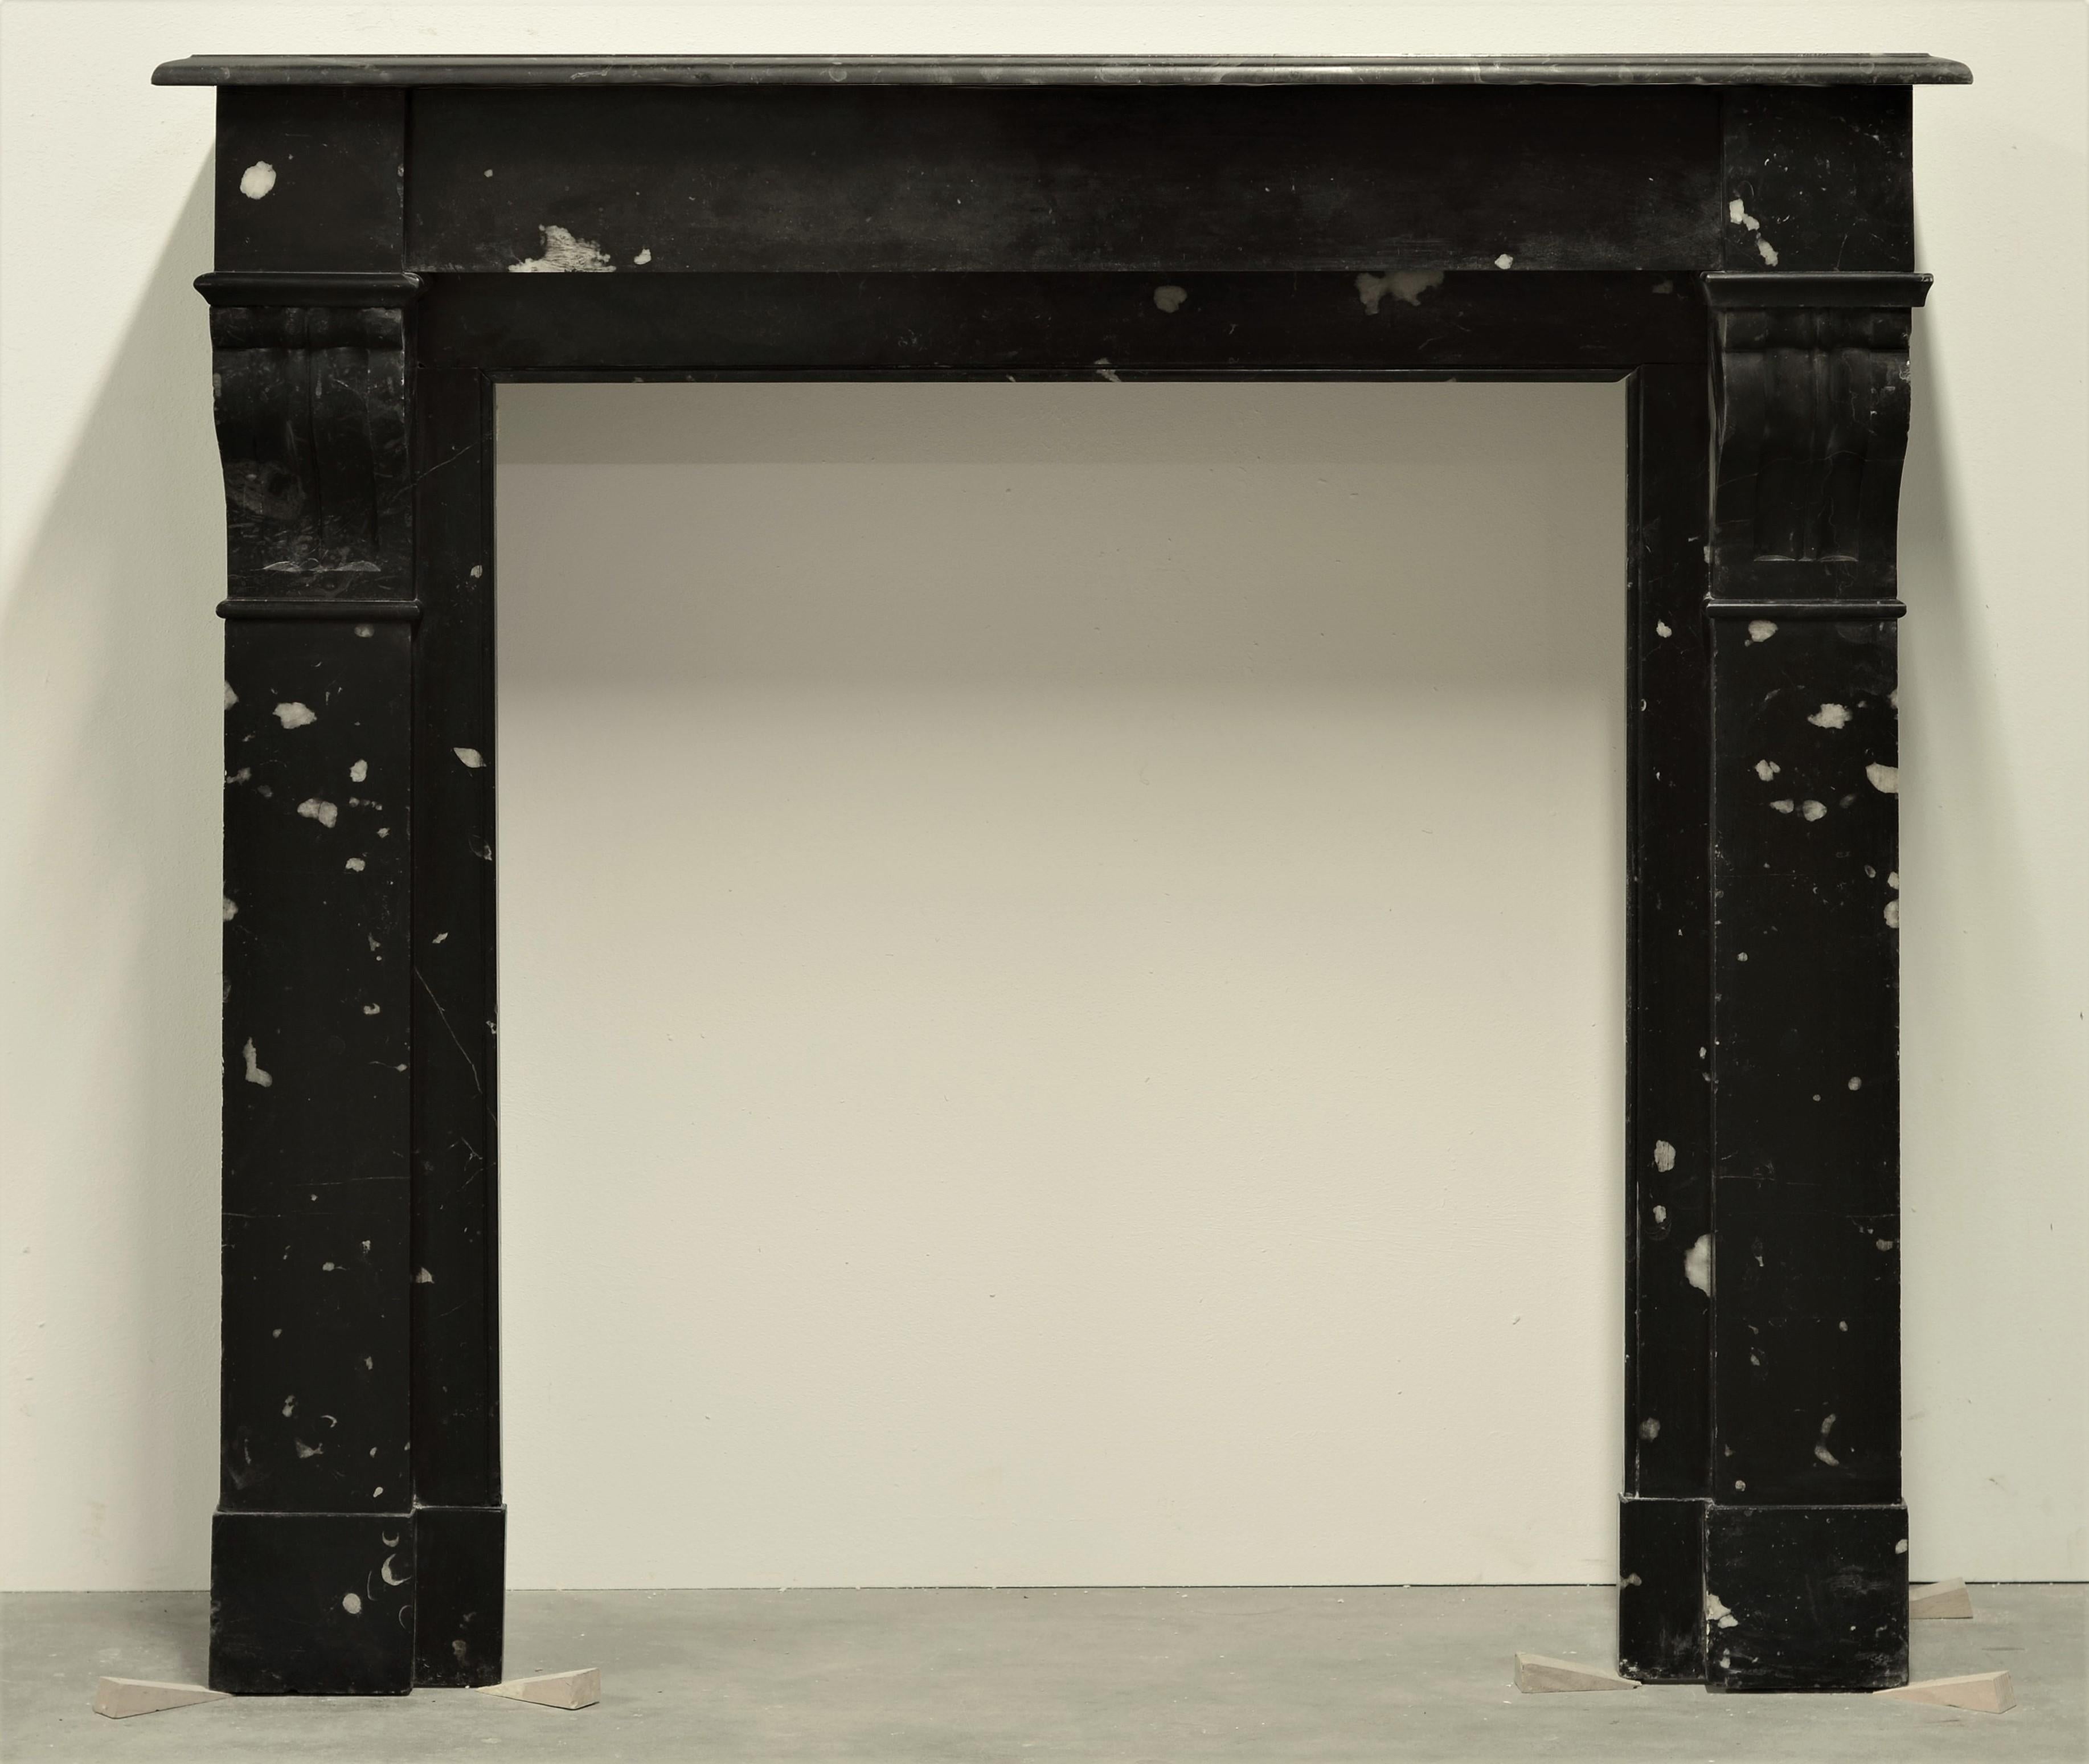 Lovely little French fireplace mantel in the style of Louis Philippe.
This black and white spotted marble gem was installed on a movie set, the wooden mounting blocks are still in place.

Great dimensions and suitable for any kind of